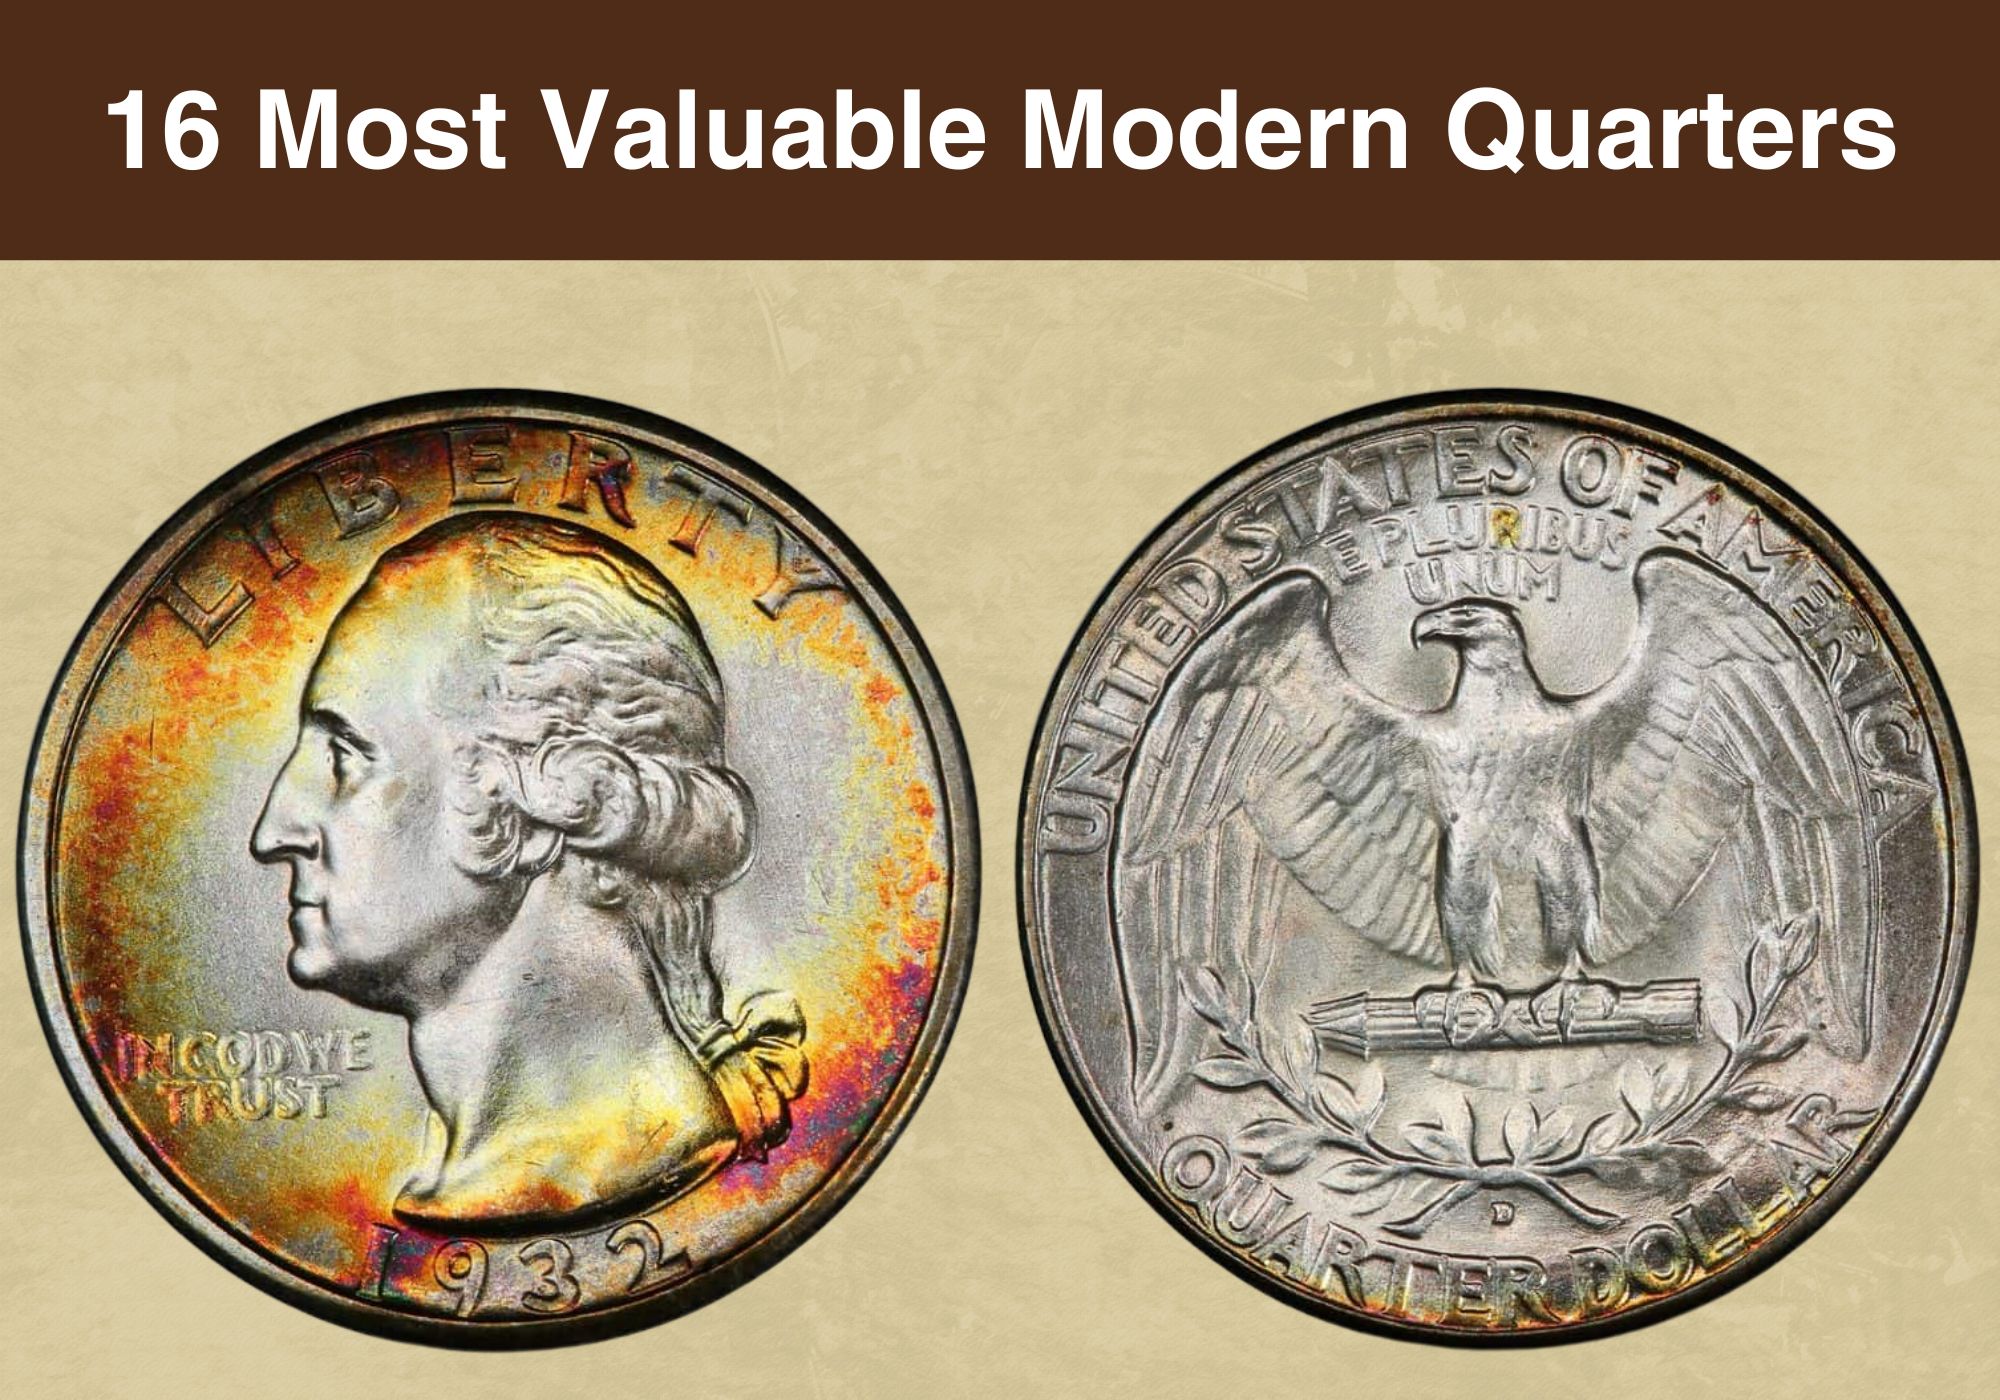 16 Most Valuable Modern Quarters